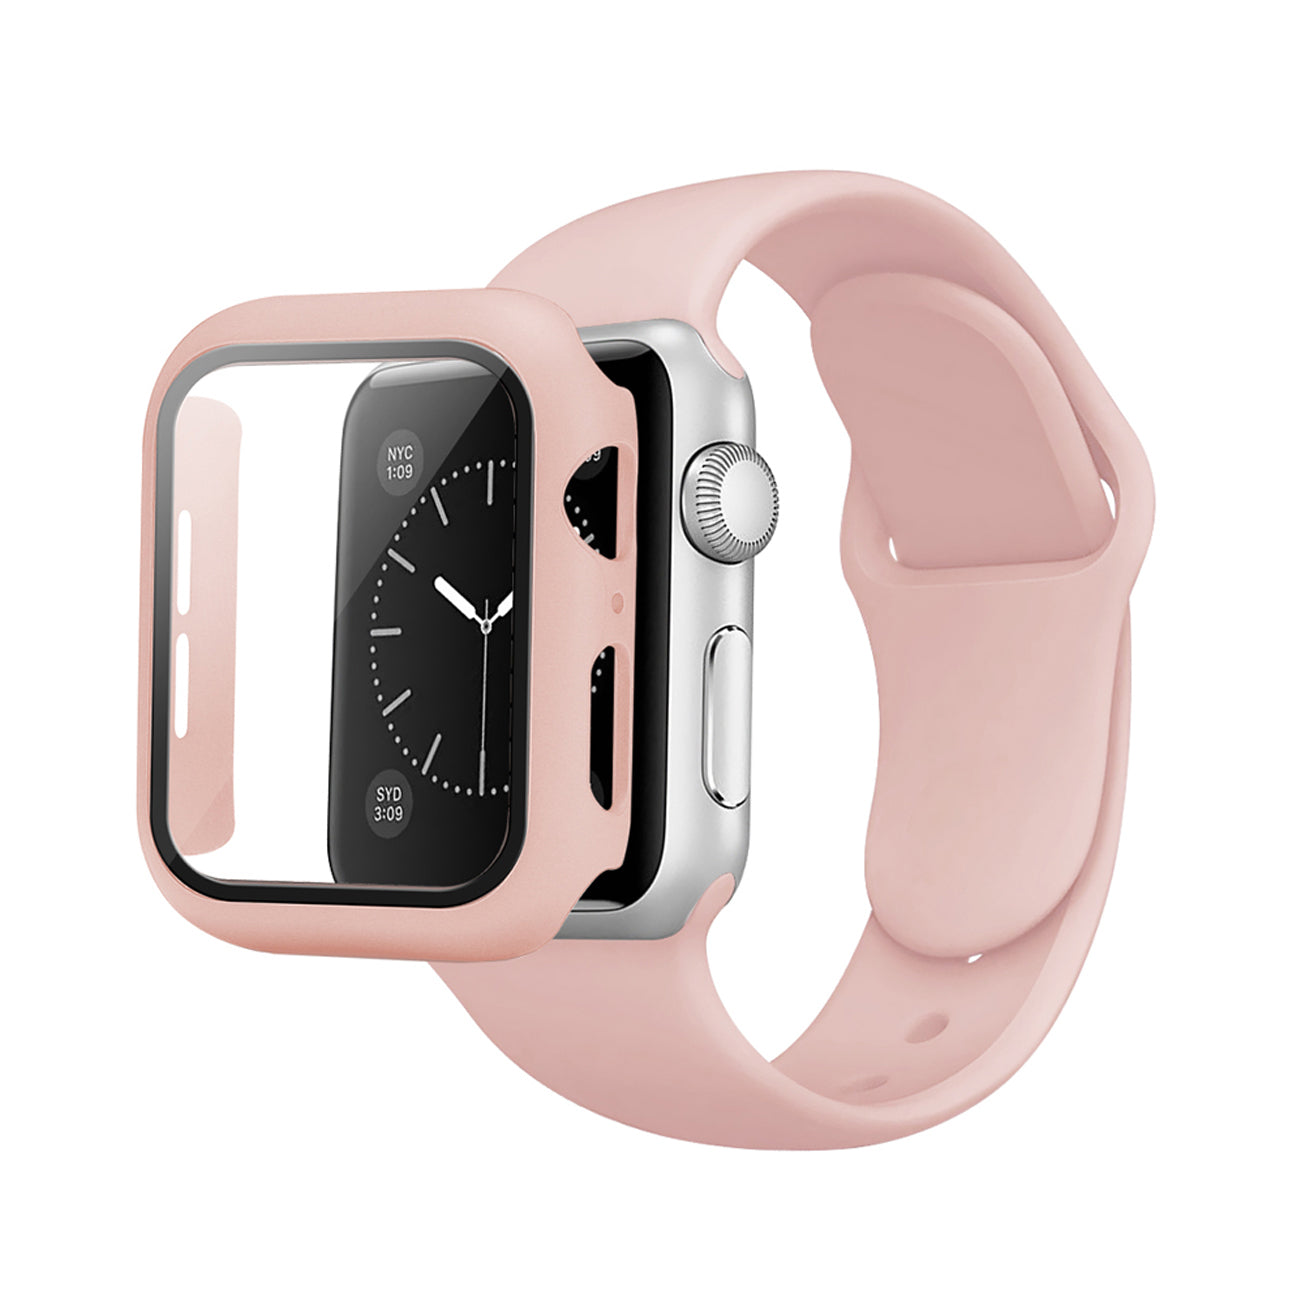 Watch Case PC With Glass Screen Protector, Silicone Watch Band Apple Watch 44mm Pink Color